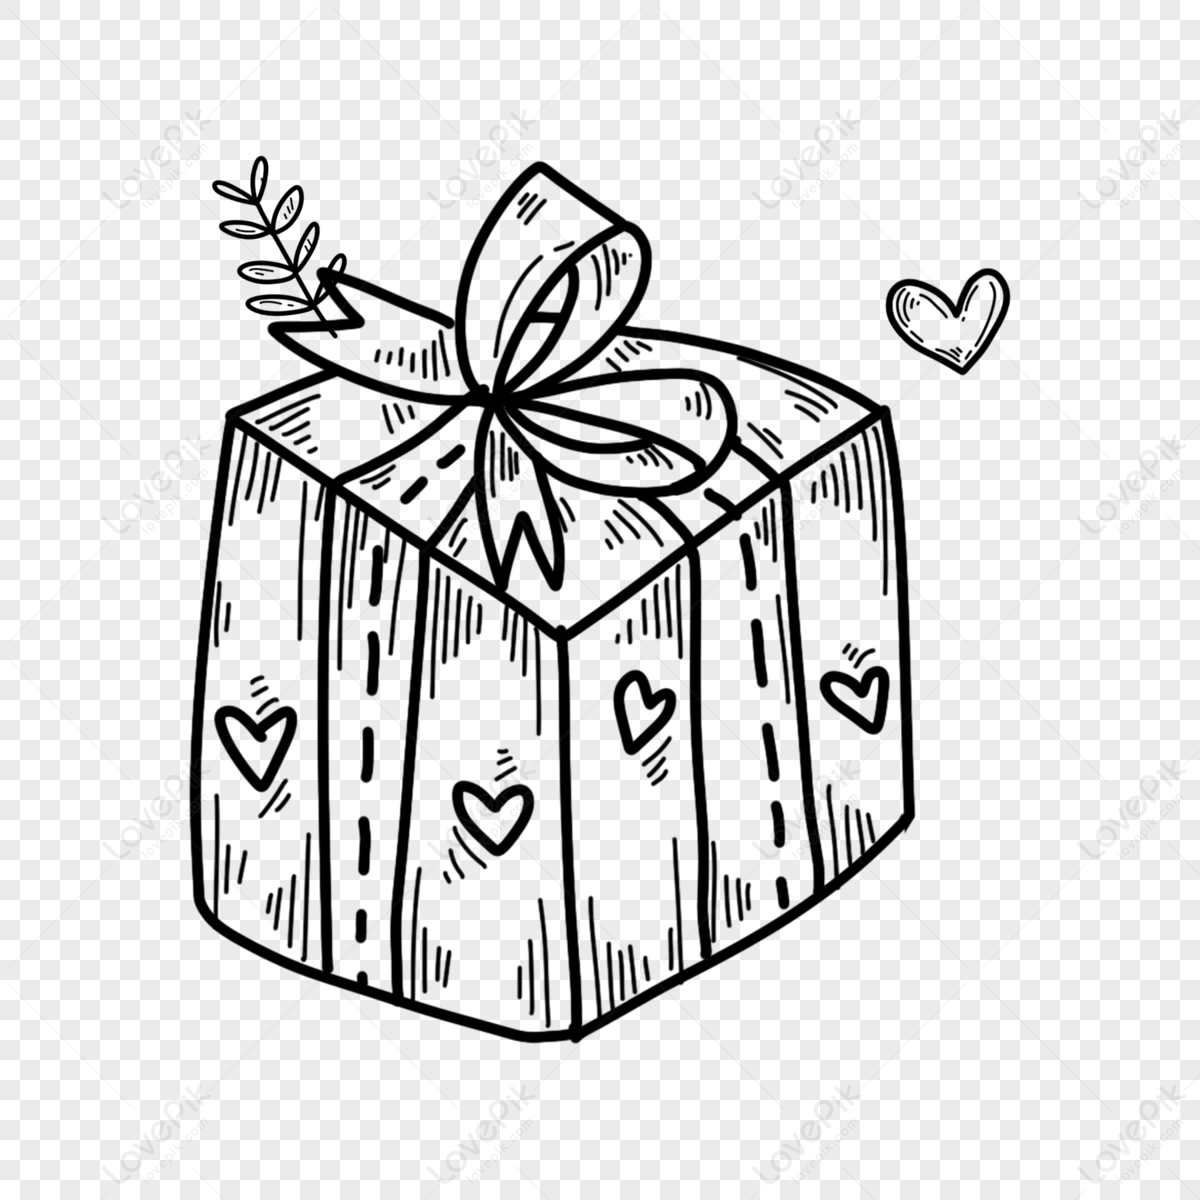 Premium Vector | Collection of hand drawn gift boxes and pack illustrations  black outline winter holidays design elements doodle vector drawing  isolated on white background line art